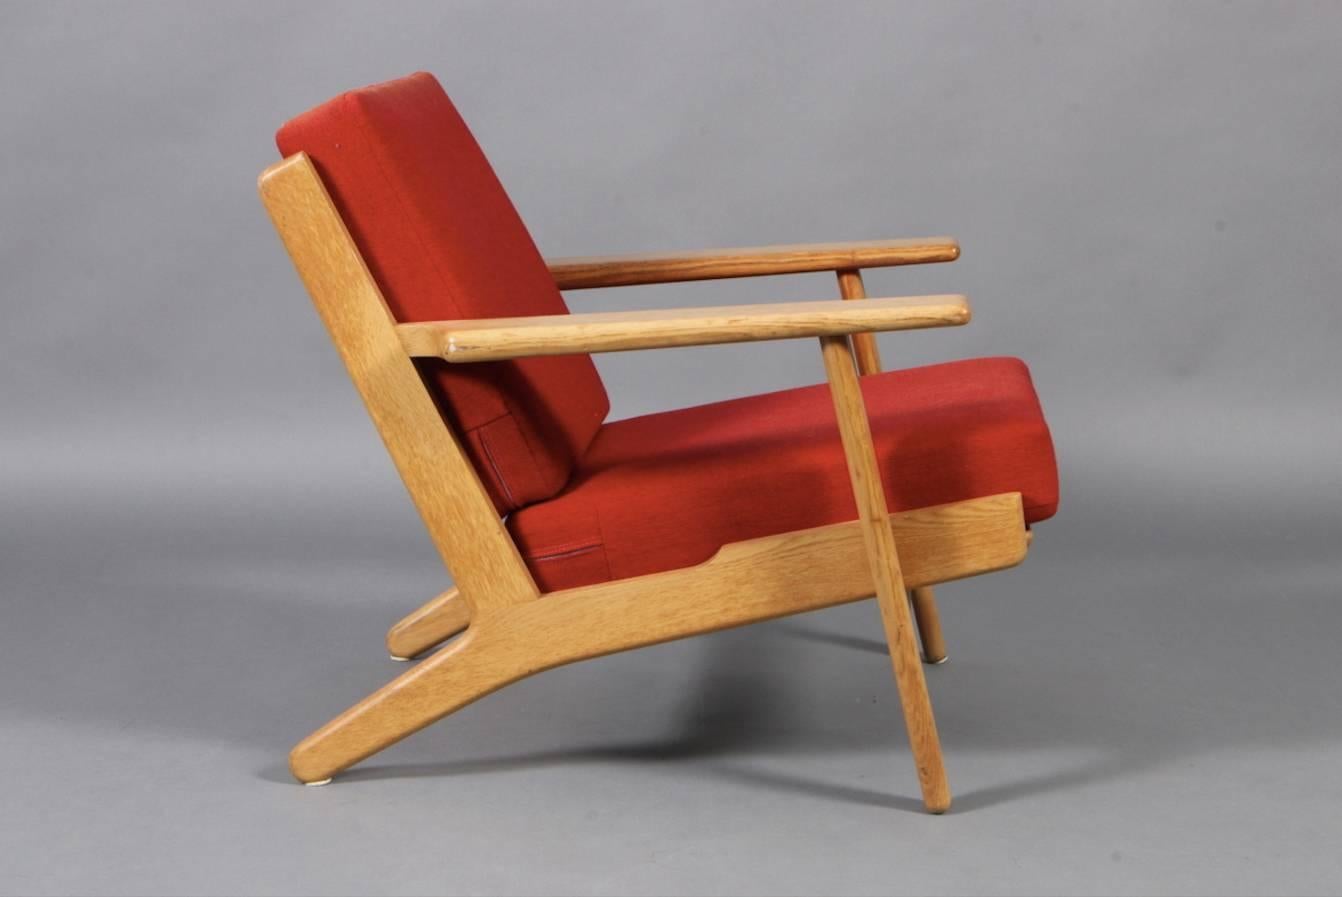 Beautiful pair of Vintage Easy Chair designed by Hans Wegner in 1953 model GE 290.
Manufactured by Getama circa 1960
Fire Stamp of the manufacturer on the underside
Original Cushion in Red Wool.